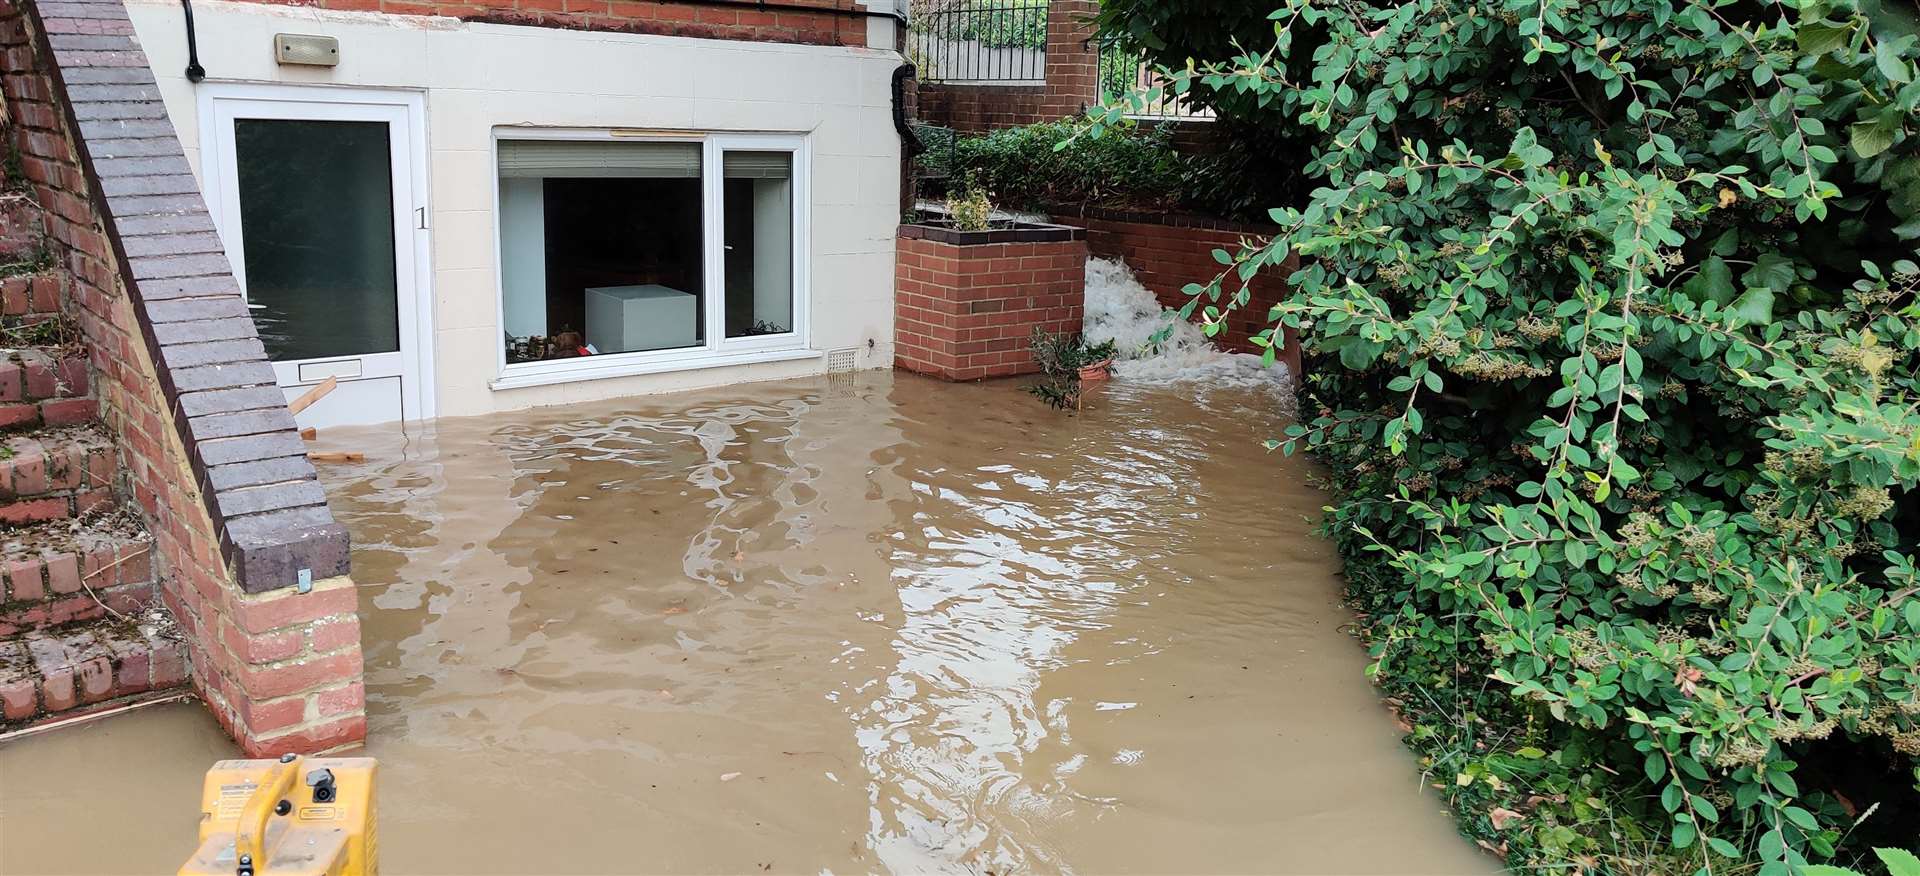 About two feet of water flooded properties after a main burst in Whitstable Road last month